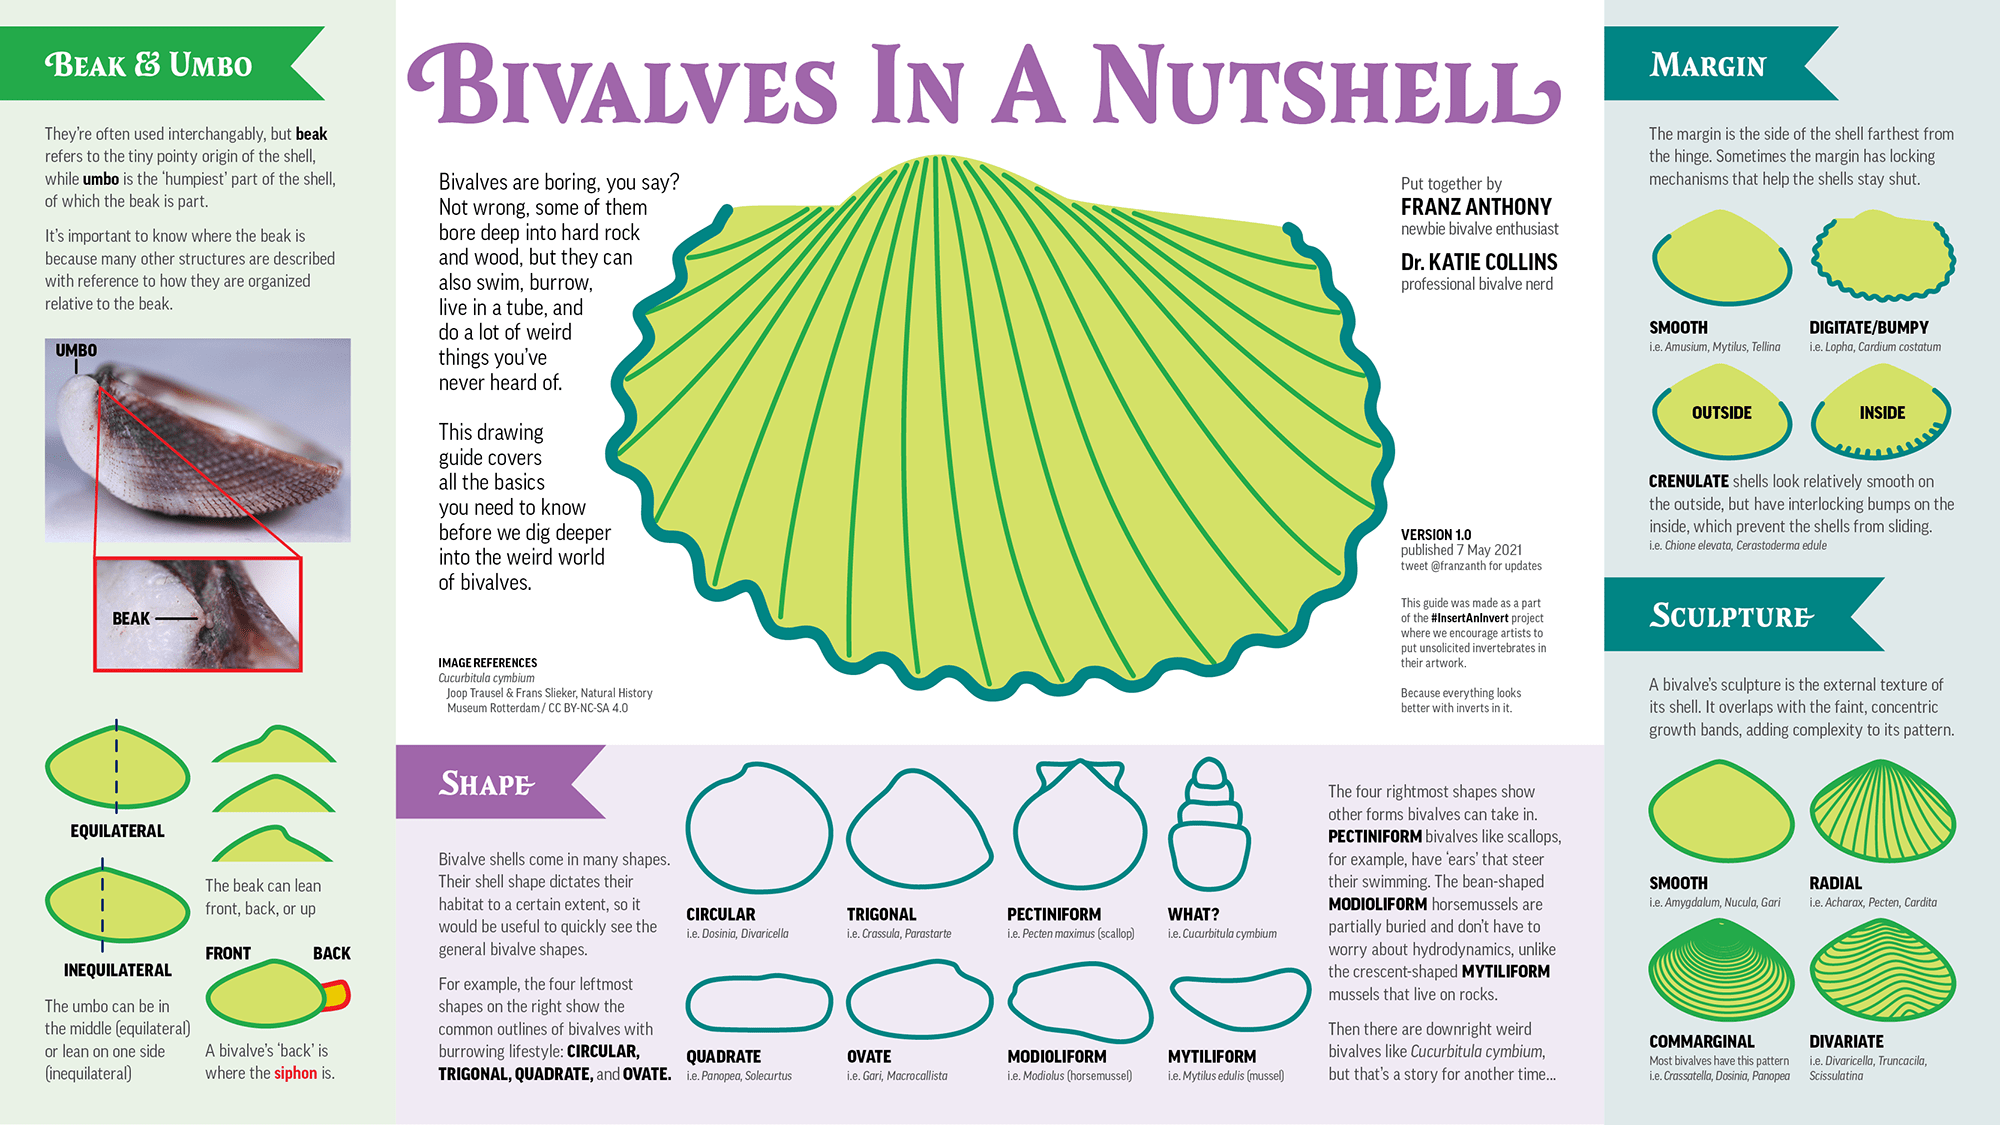 Infographic showing different aspects of bivalve shell form.